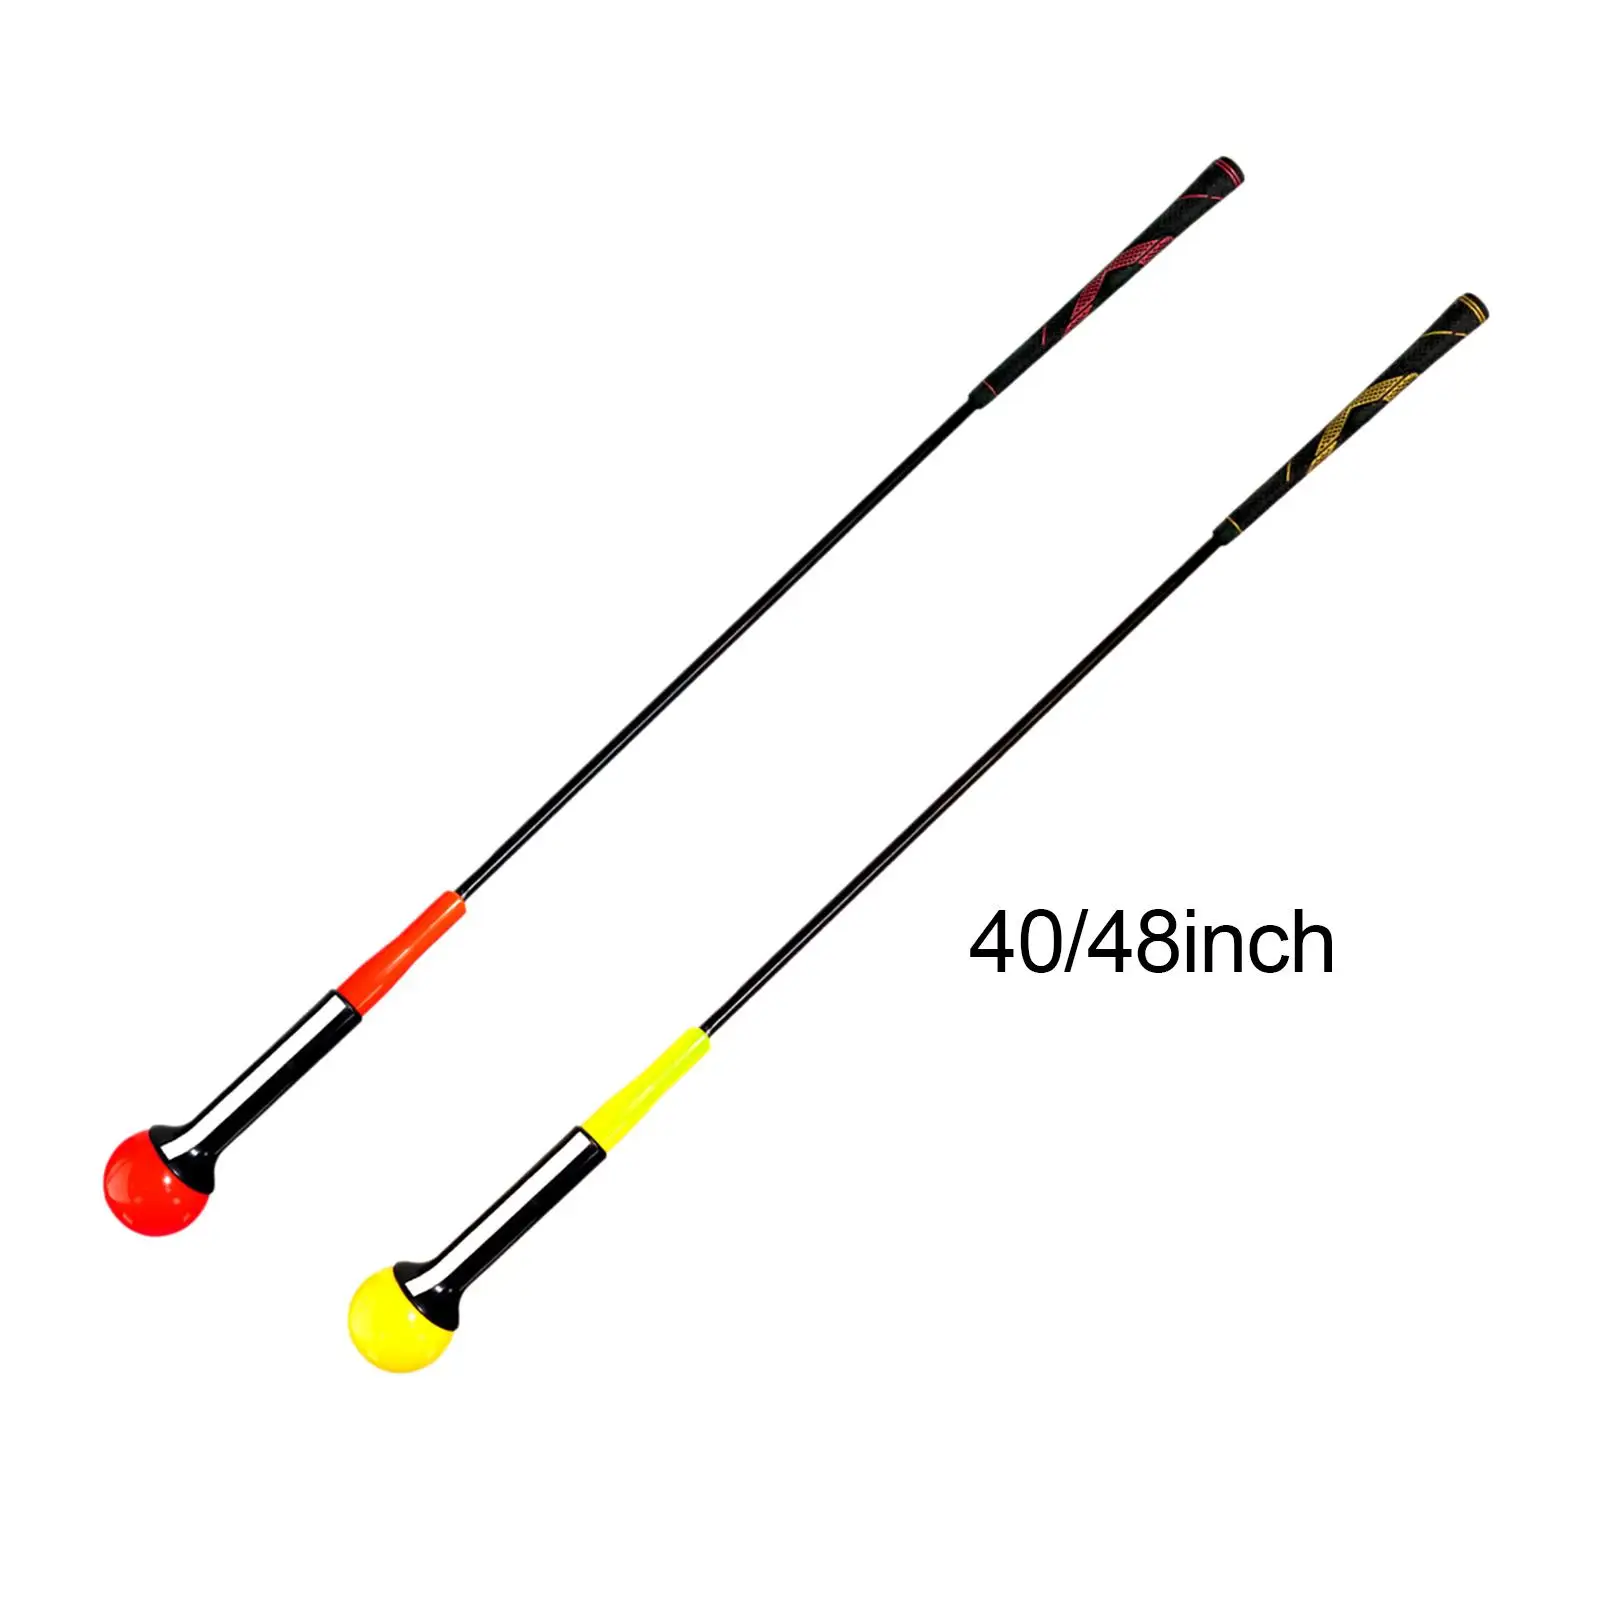 Lightweight Warm up Stick Practice Position Correction Golf Trainer Golf Accessories Golf Swing Trainer Aid for Rhythm Adult